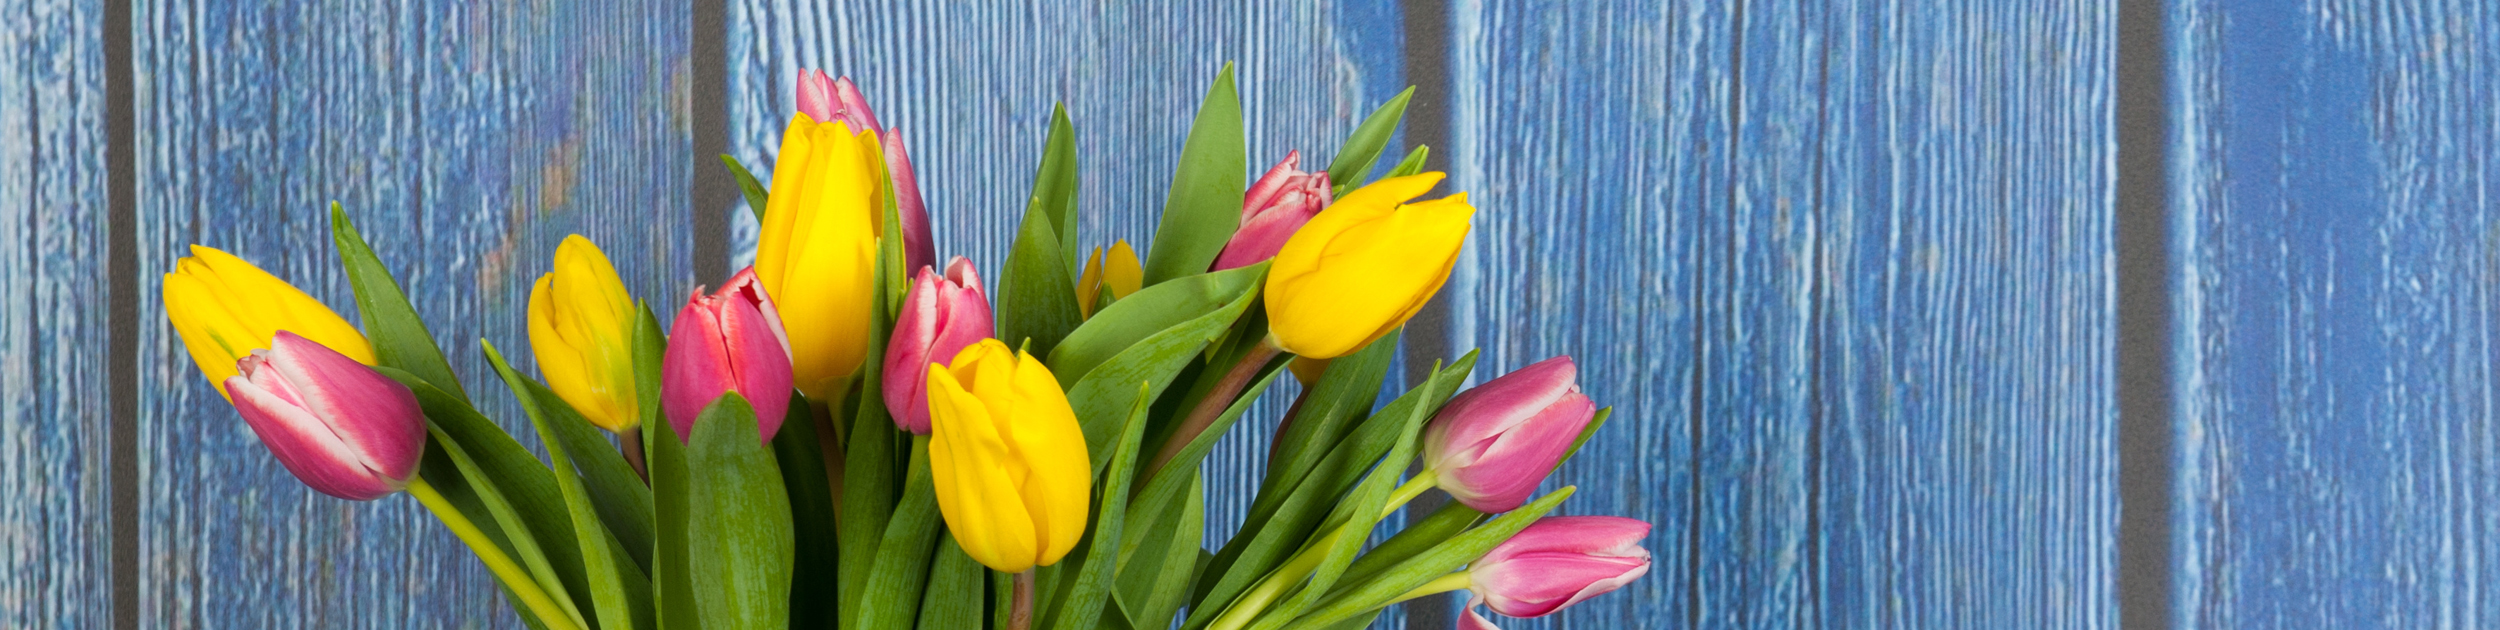 beautiful multi colored tulips on blue wooden background